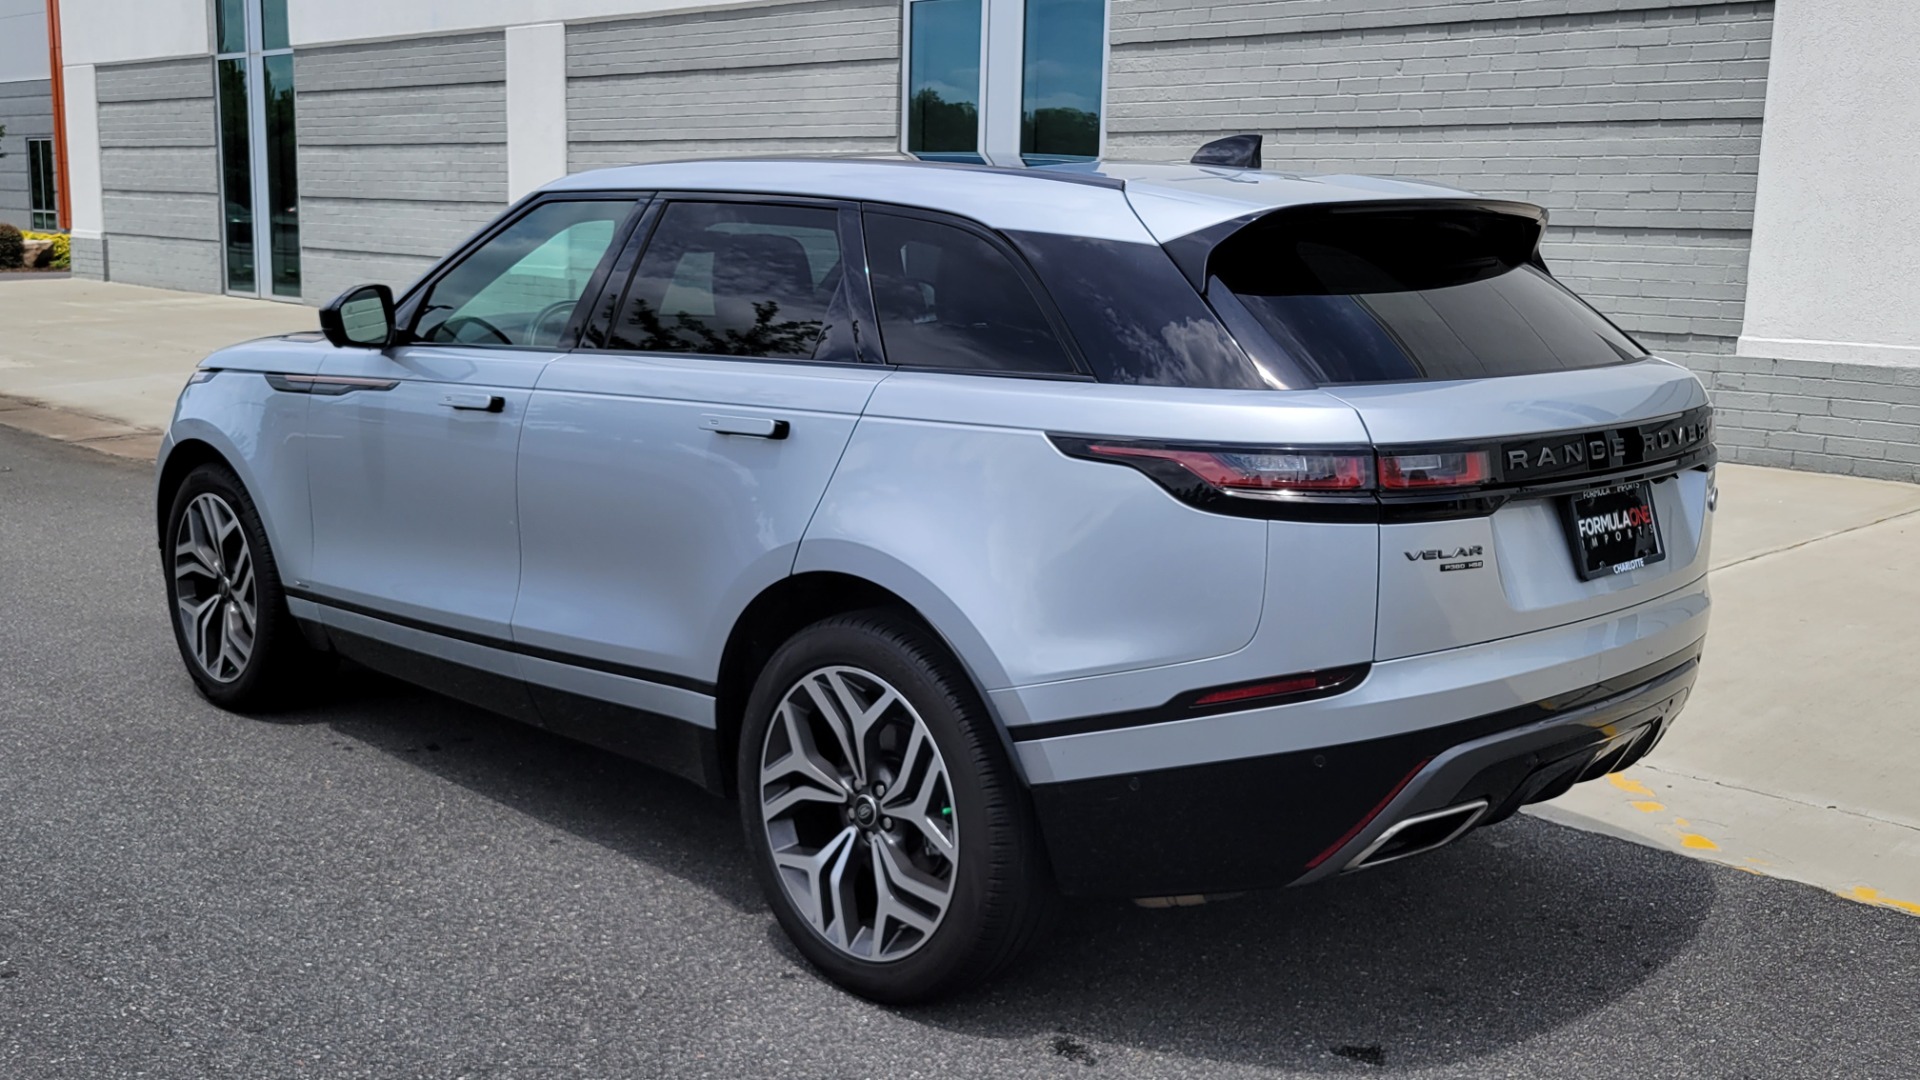 Used 2018 Land Rover RANGE ROVER VELAR R-DYNAMIC / NAV / MERIDIAN / SUNROOF / CAMERA for sale $58,995 at Formula Imports in Charlotte NC 28227 5